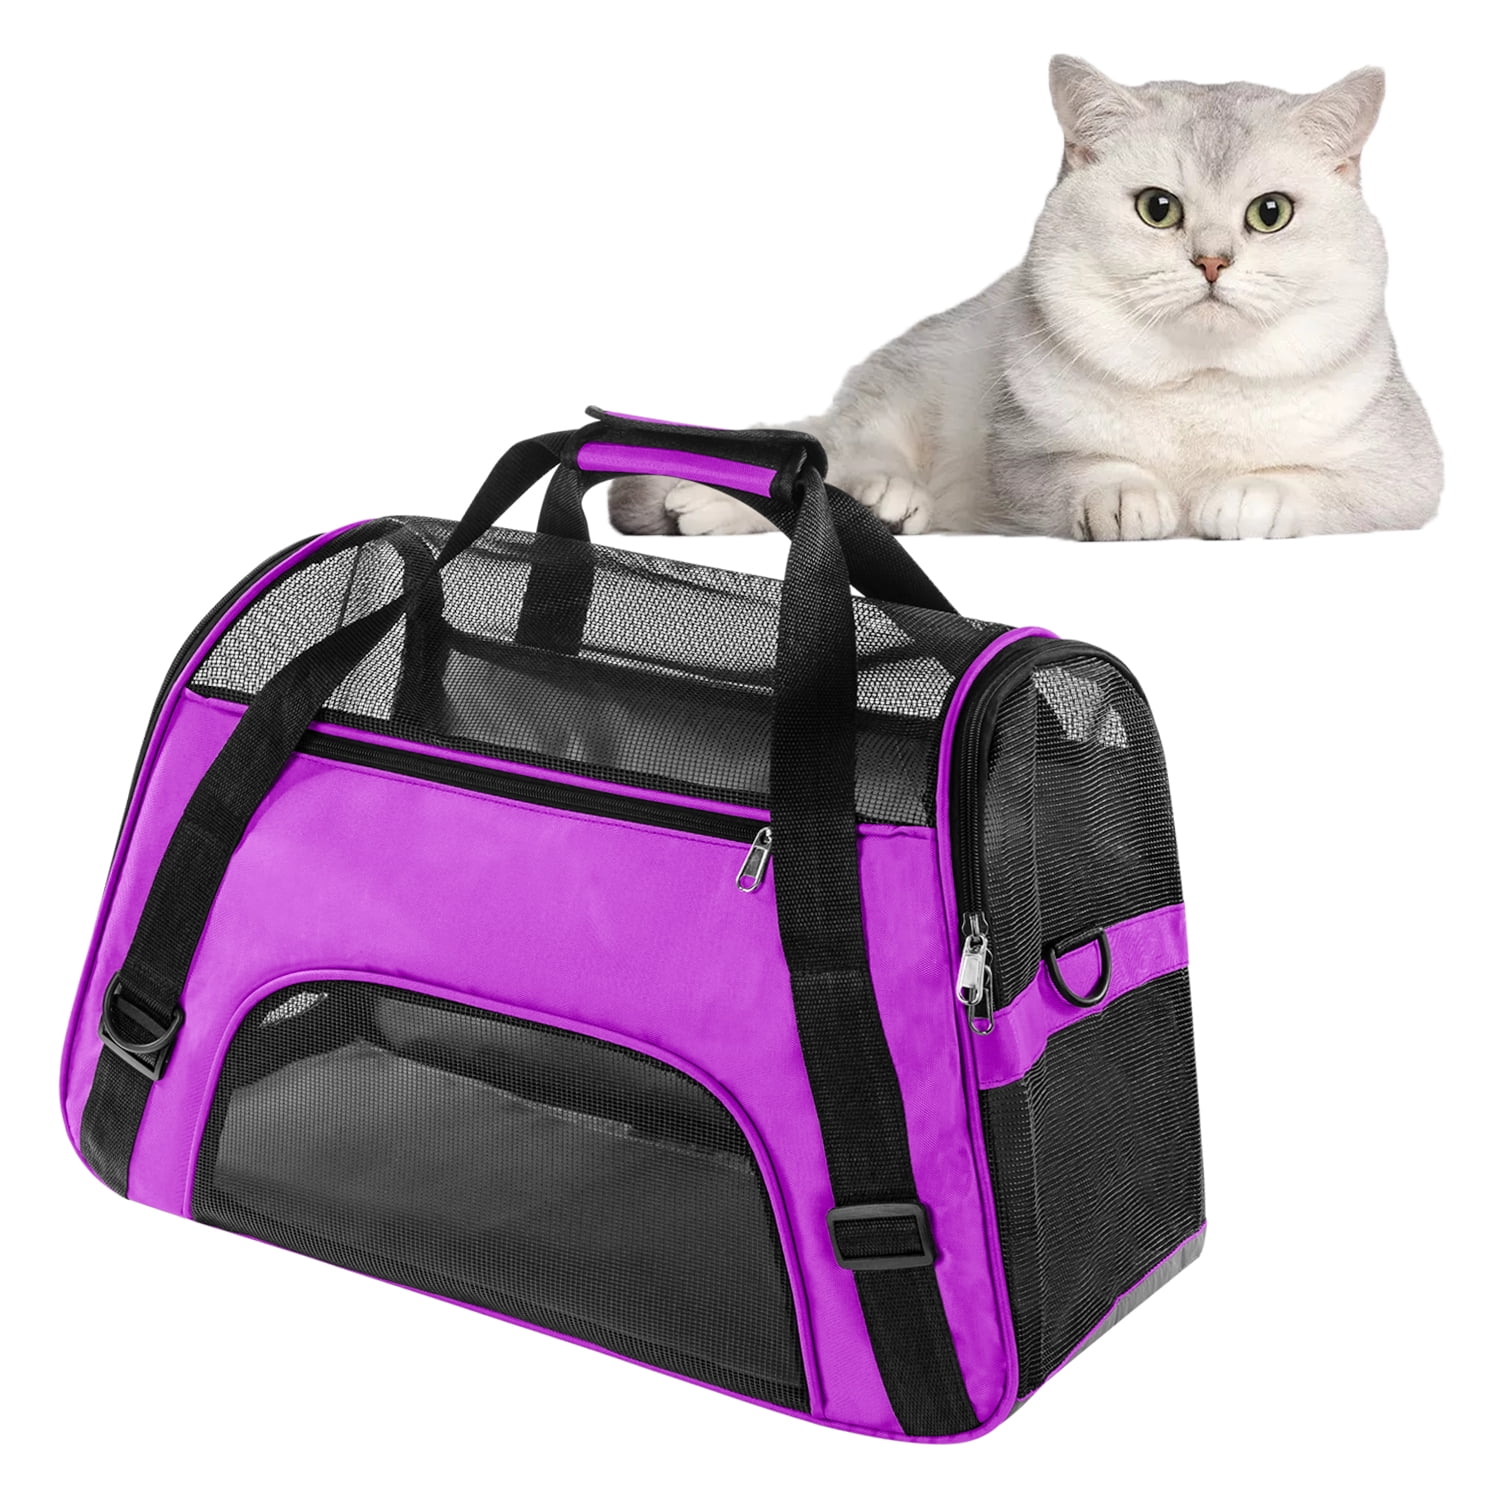 Pink Pet Carrier Bag Airline Approved Pet Travel Collapsible Carrier Cat Carriers for Medium Cats Small Cats Small Pet Carrier Small Dog 